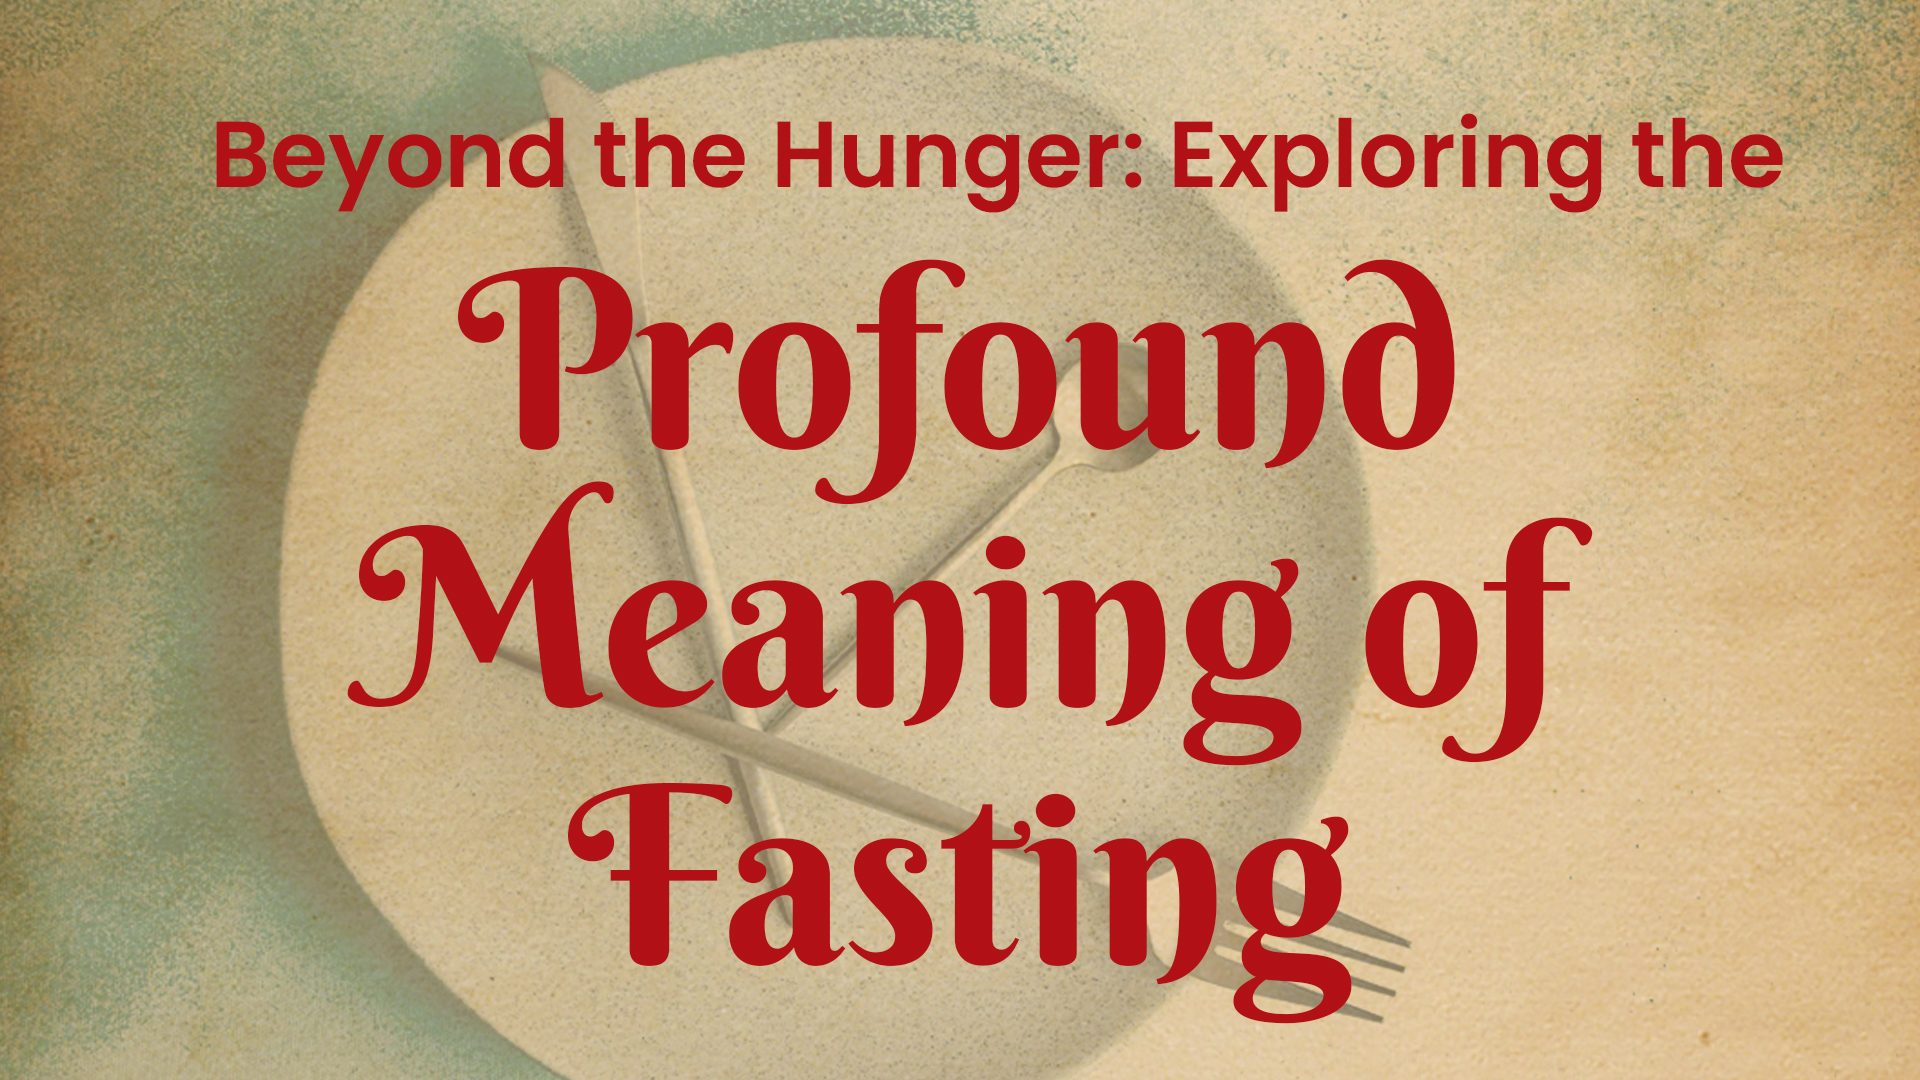 meaning of fasting